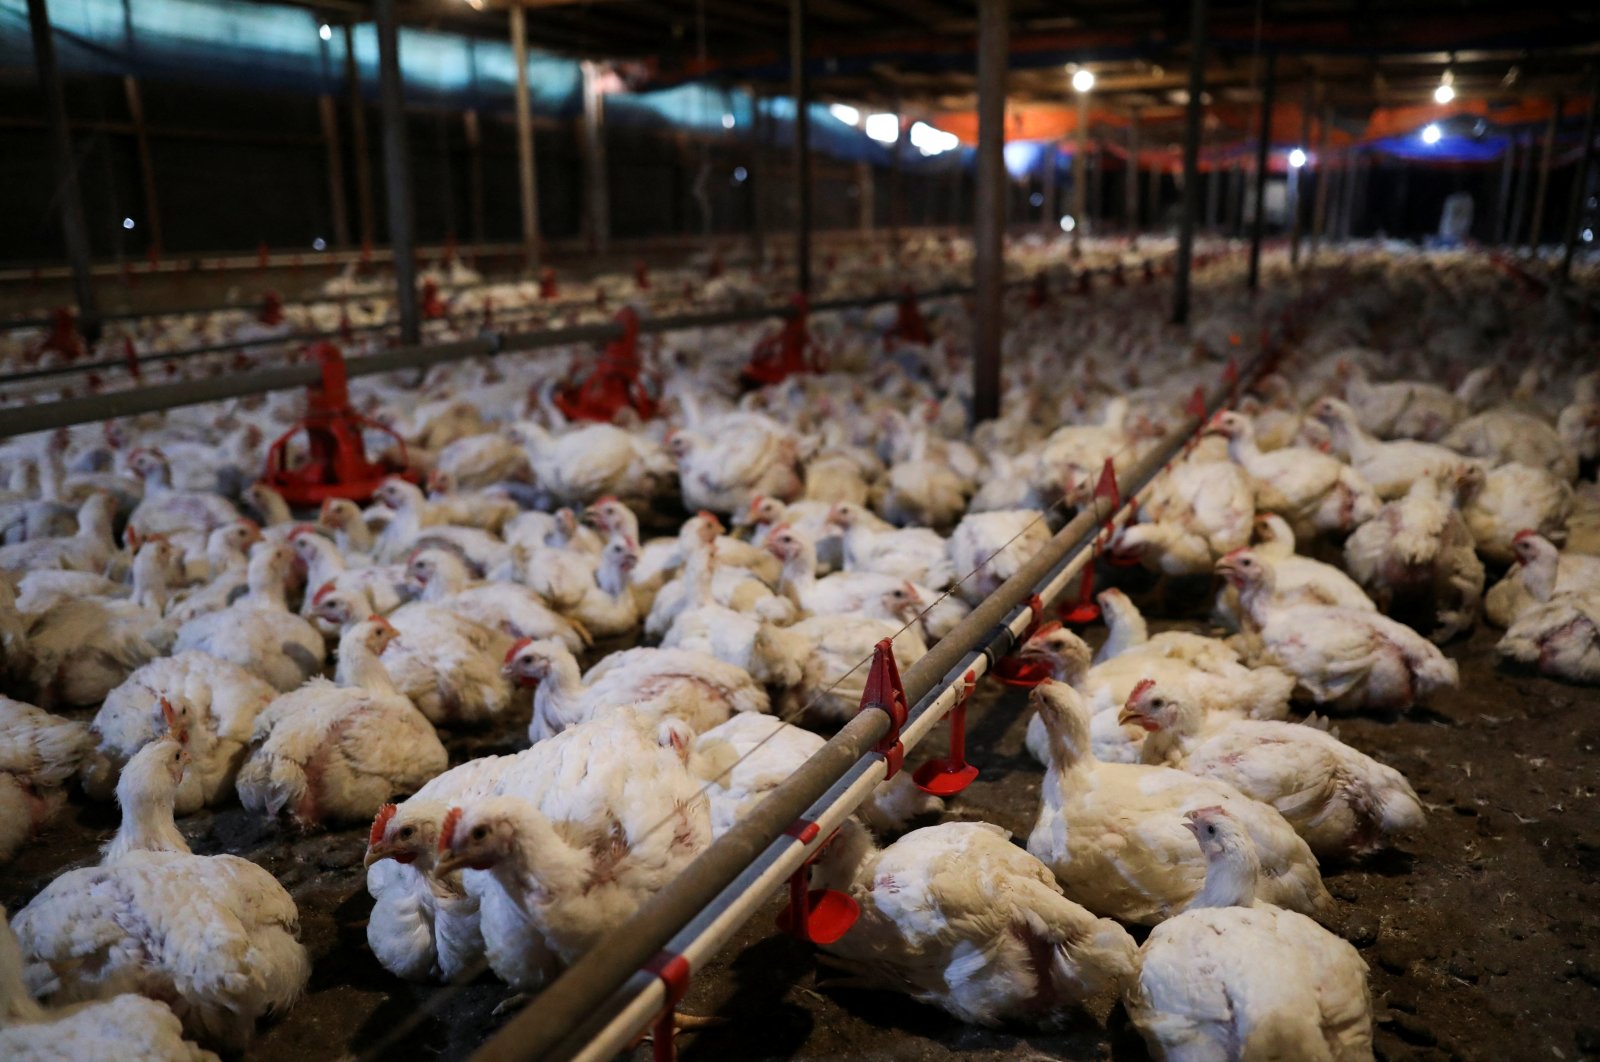 Chickens are seen inside a poultry farm in Sepang, Selangor, Malaysia, May 27, 2022.  (Reuters Photo)